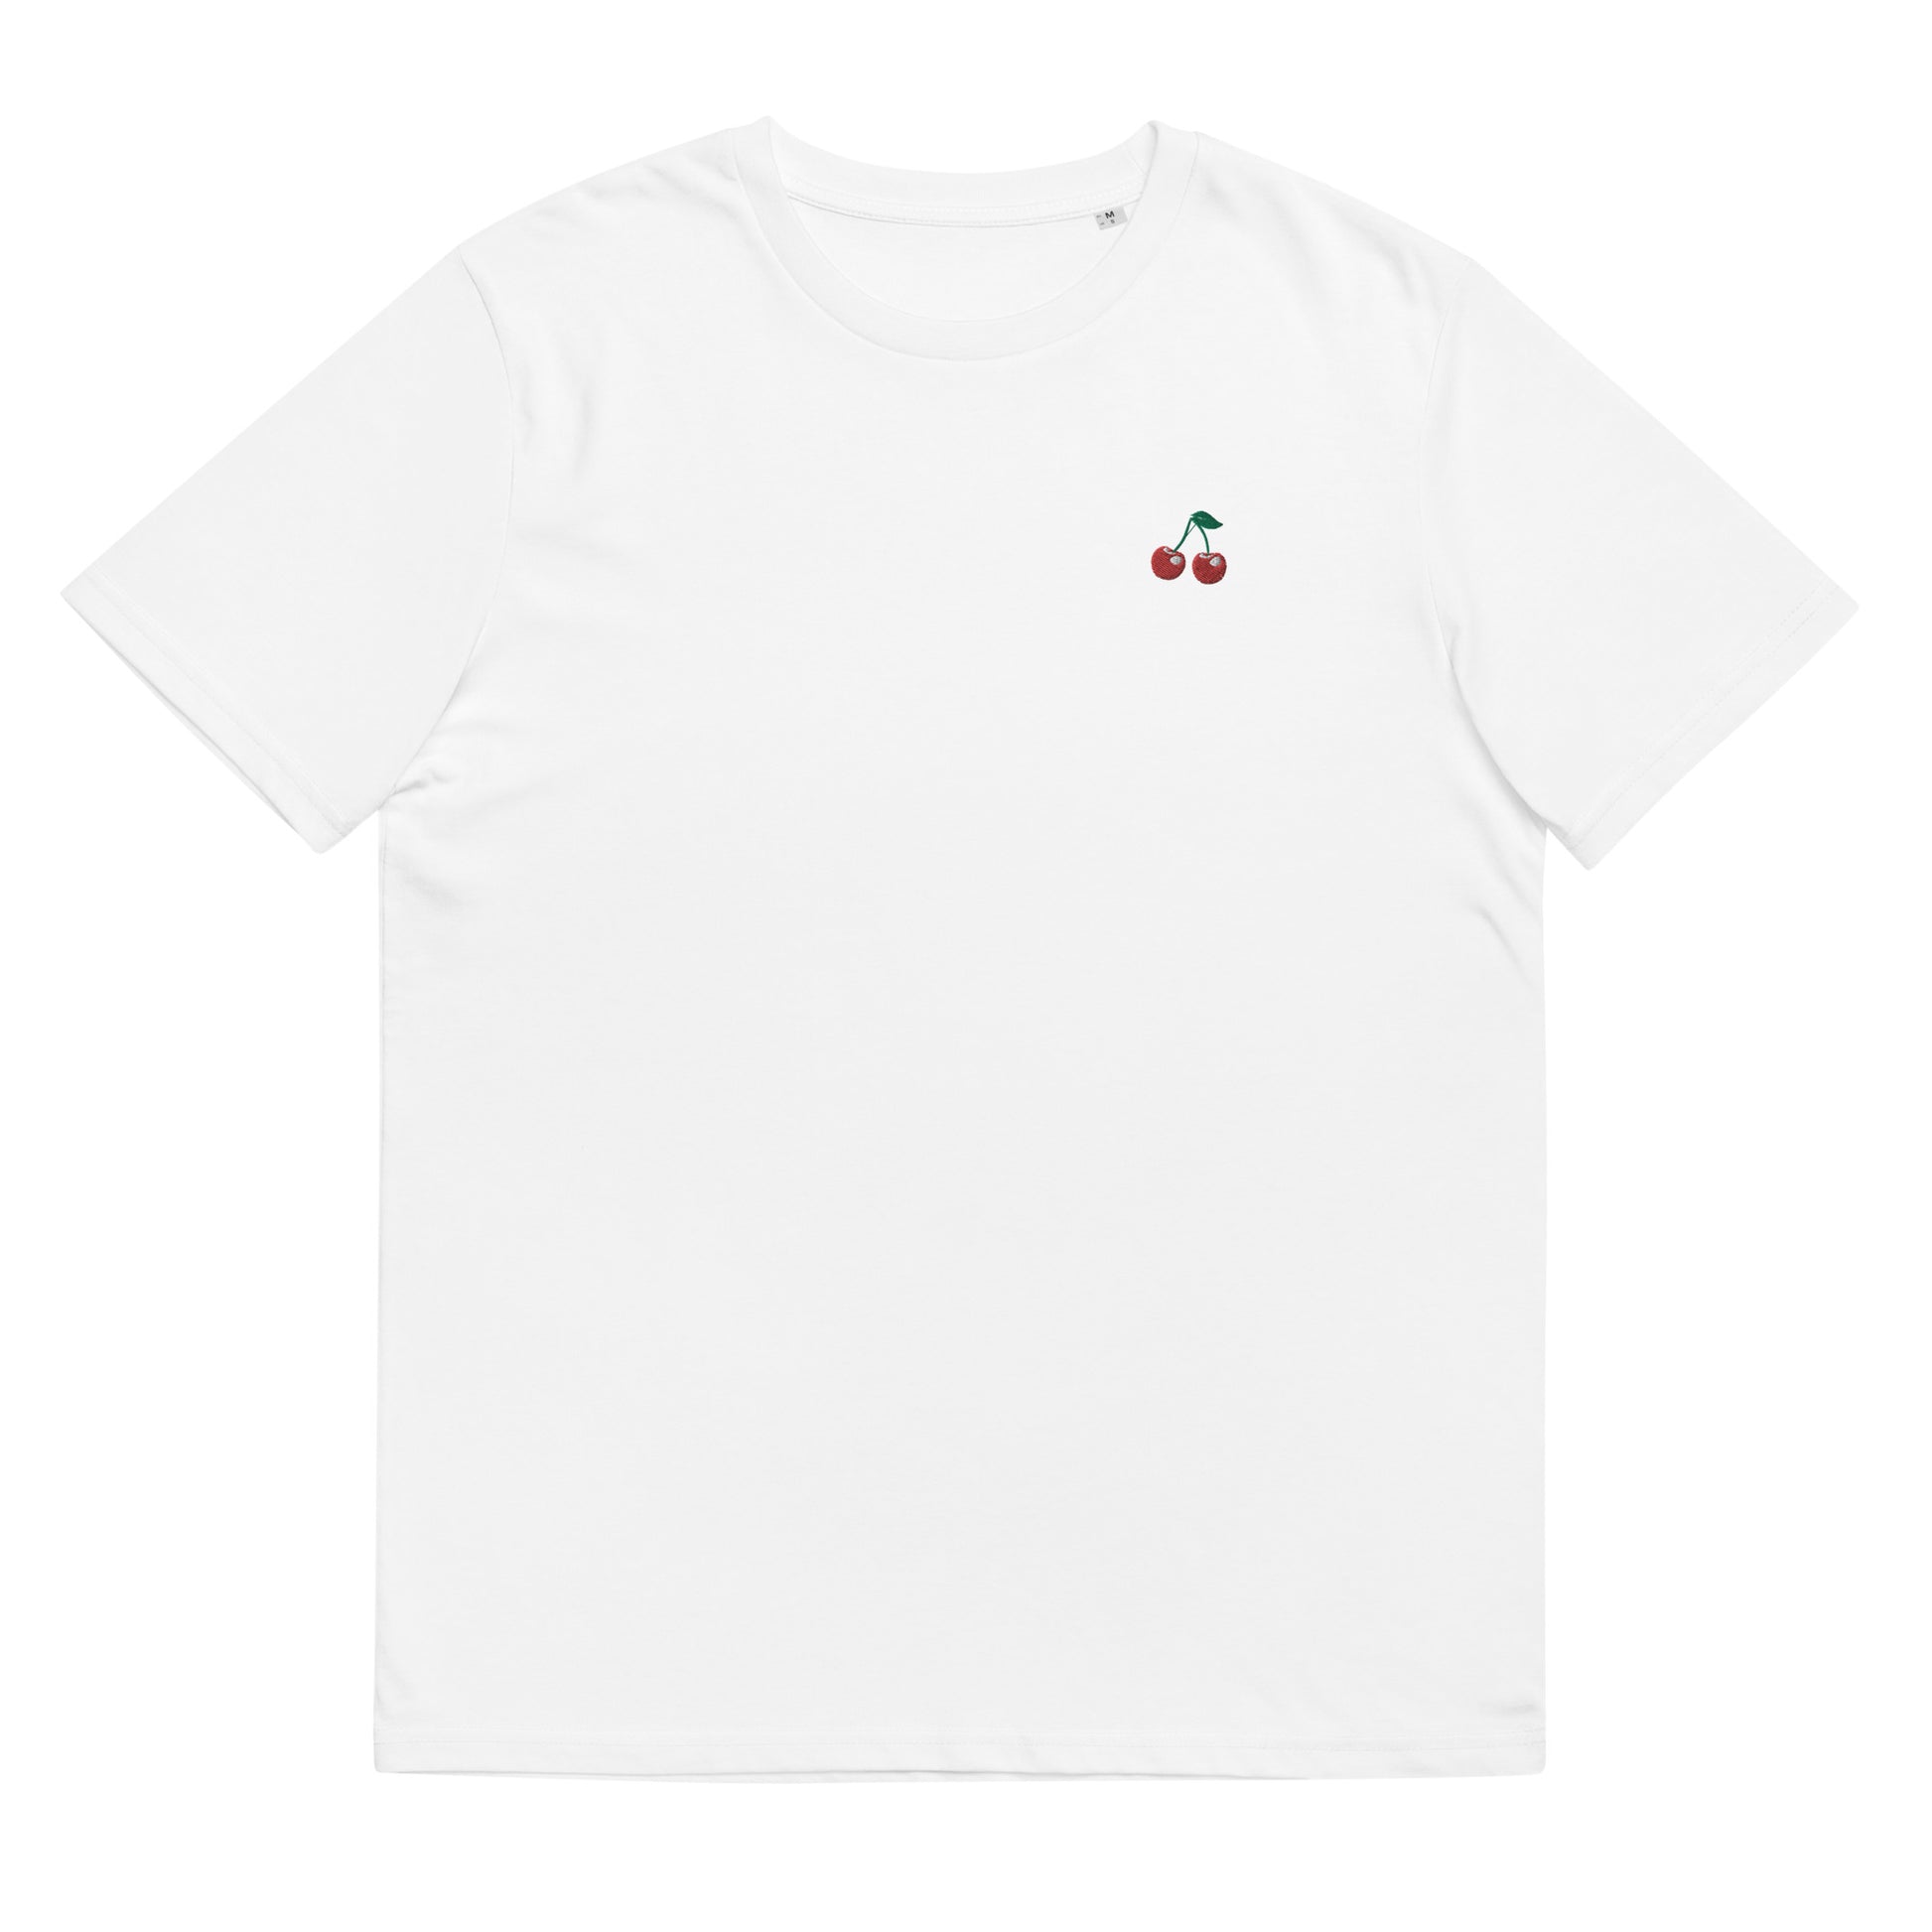 Fitted white organic cotton t-shirt with small embroidered red cherries on the left chest. Available in sizes S to 3XL.